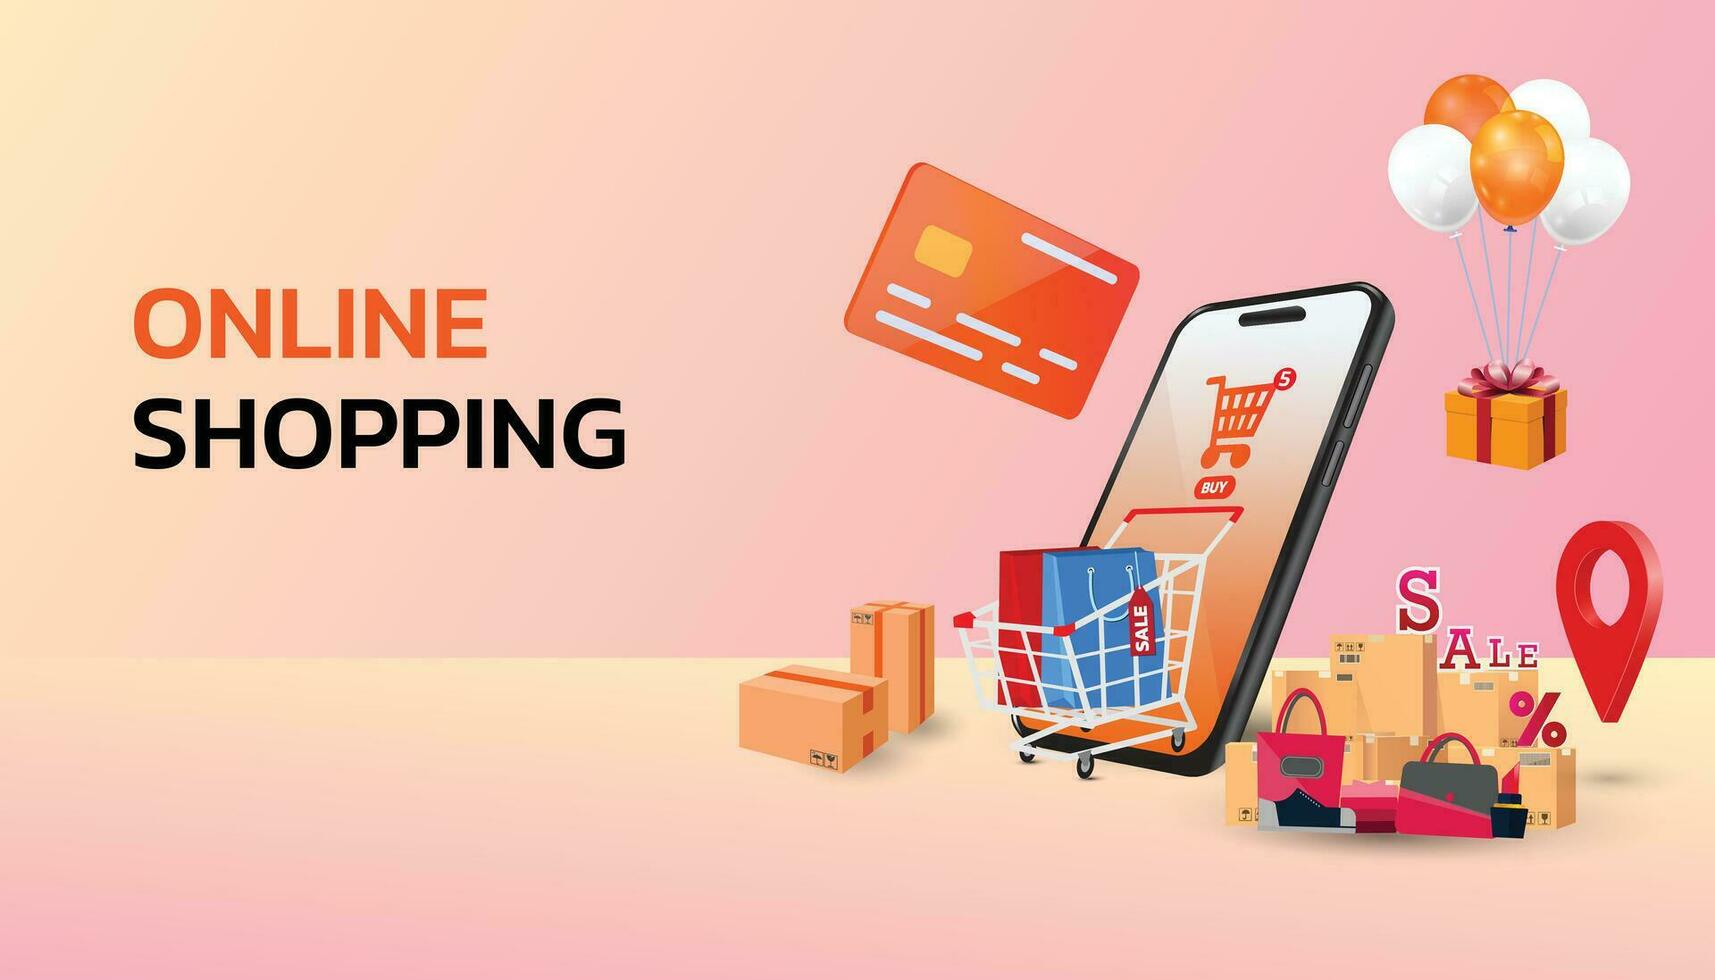 online shopping concept, e-commerce, flash sale, discount, payment cashless, digital, flat illustration vector, the concept of online shopping on social media app, Shopping Online on Website or Mobile vector